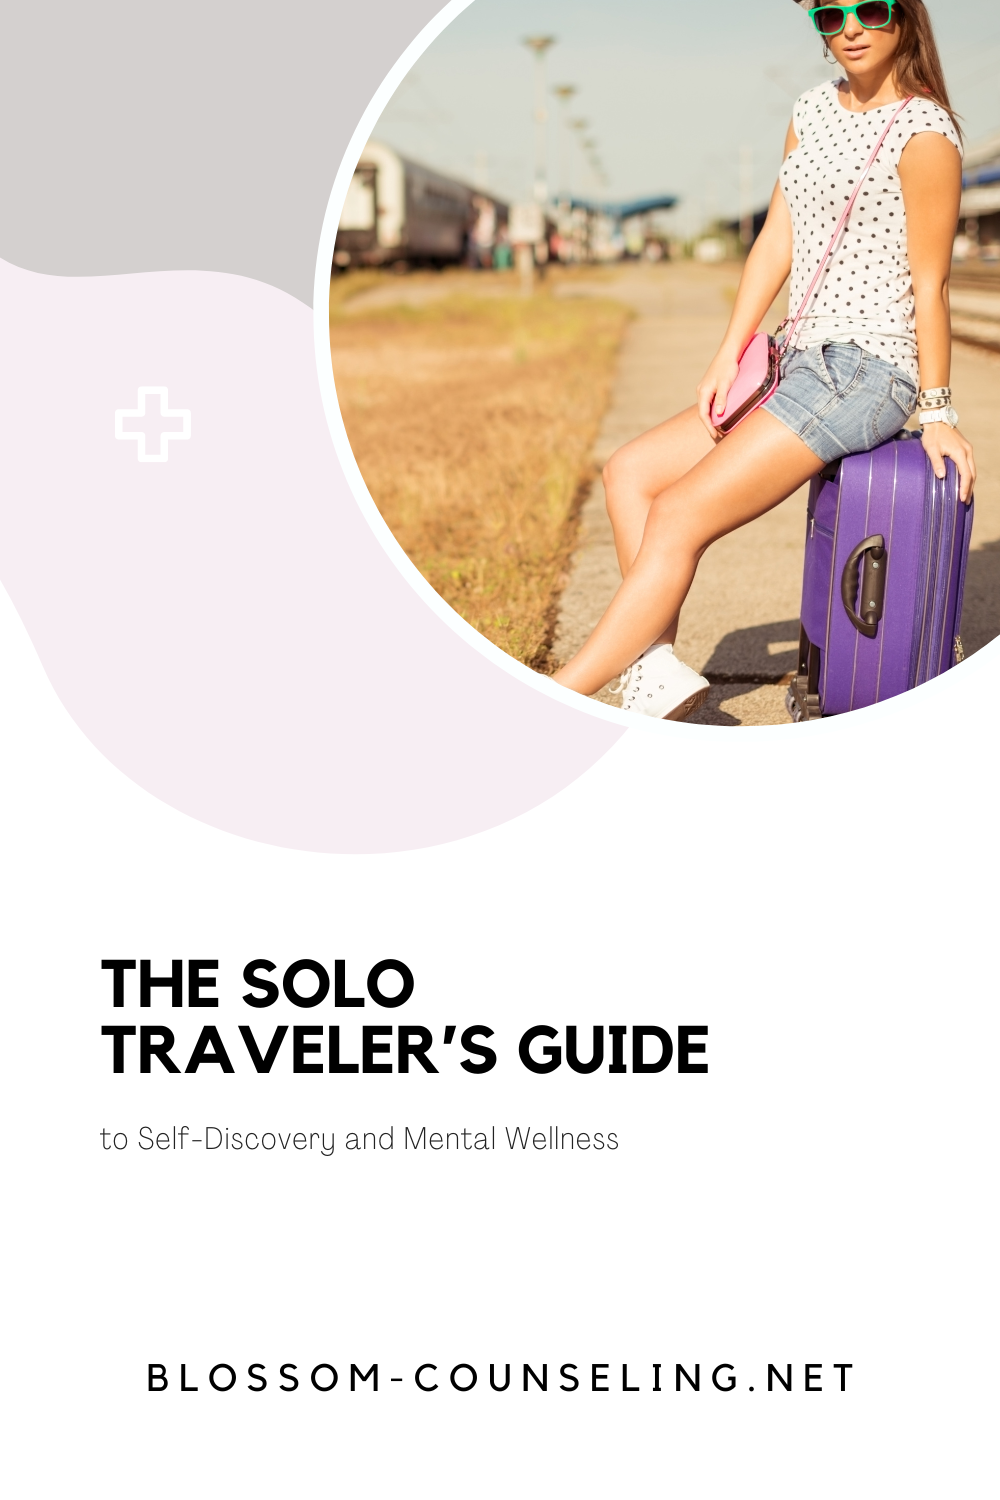 The Solo Traveler’s Guide to Self-Discovery and Mental Wellness